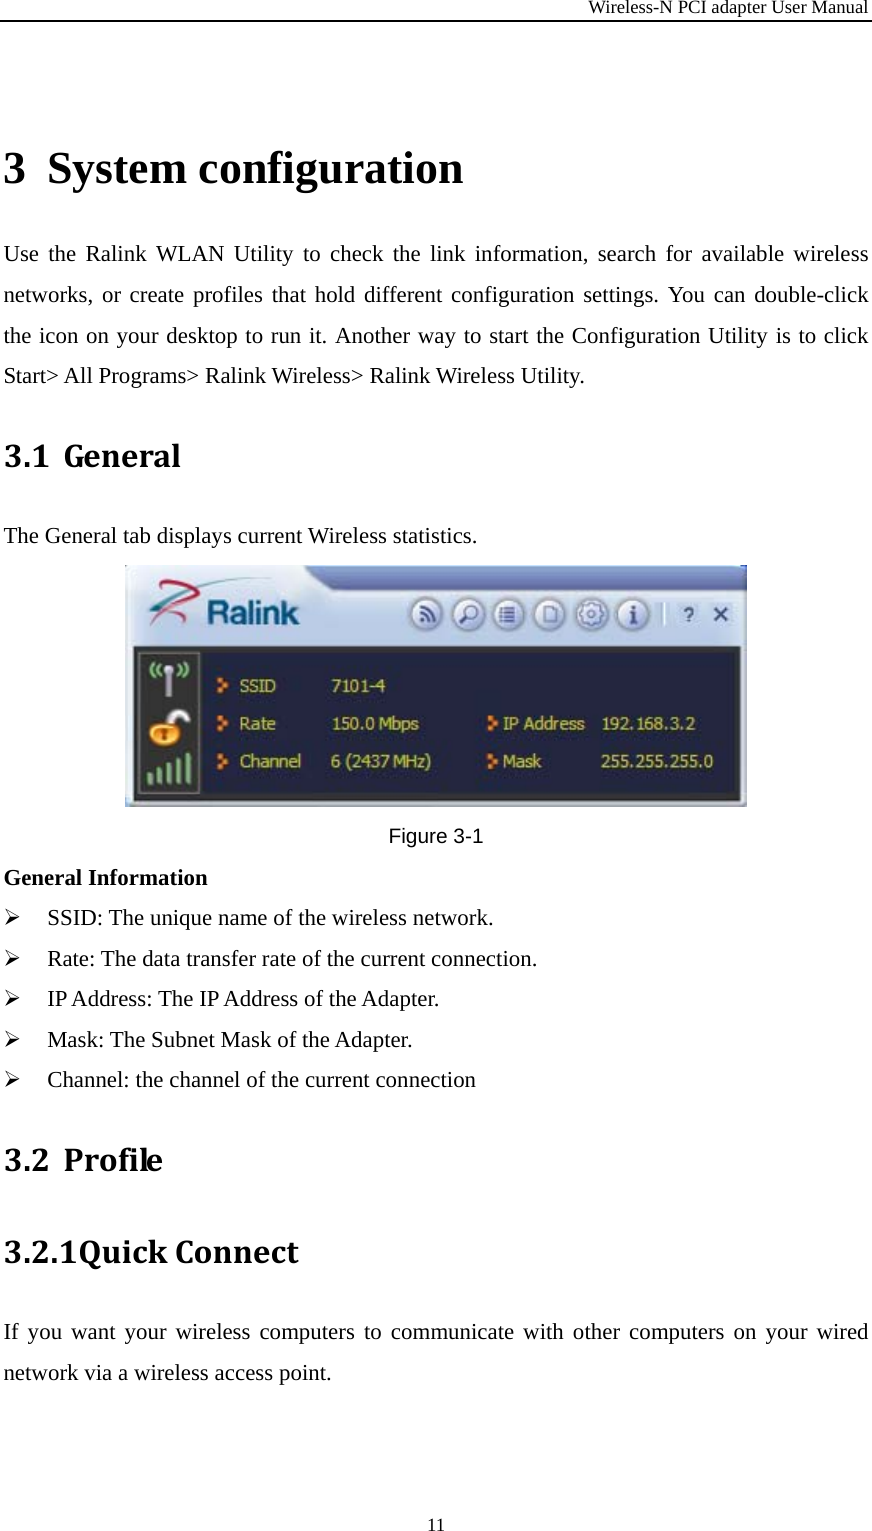 Wireless-N PCI adapter User Manual 11 3 System configuration Use the Ralink WLAN Utility to check the link information, search for available wireless networks, or create profiles that hold different configuration settings. You can double-click the icon on your desktop to run it. Another way to start the Configuration Utility is to click Start&gt; All Programs&gt; Ralink Wireless&gt; Ralink Wireless Utility. 3.1 GeneralThe General tab displays current Wireless statistics. Figure 3-1 General Information  SSID: The unique name of the wireless network.  Rate: The data transfer rate of the current connection.  IP Address: The IP Address of the Adapter.  Mask: The Subnet Mask of the Adapter.  Channel: the channel of the current connection 3.2 Profile3.2.1 QuickConnectIf you want your wireless computers to communicate with other computers on your wired network via a wireless access point.   